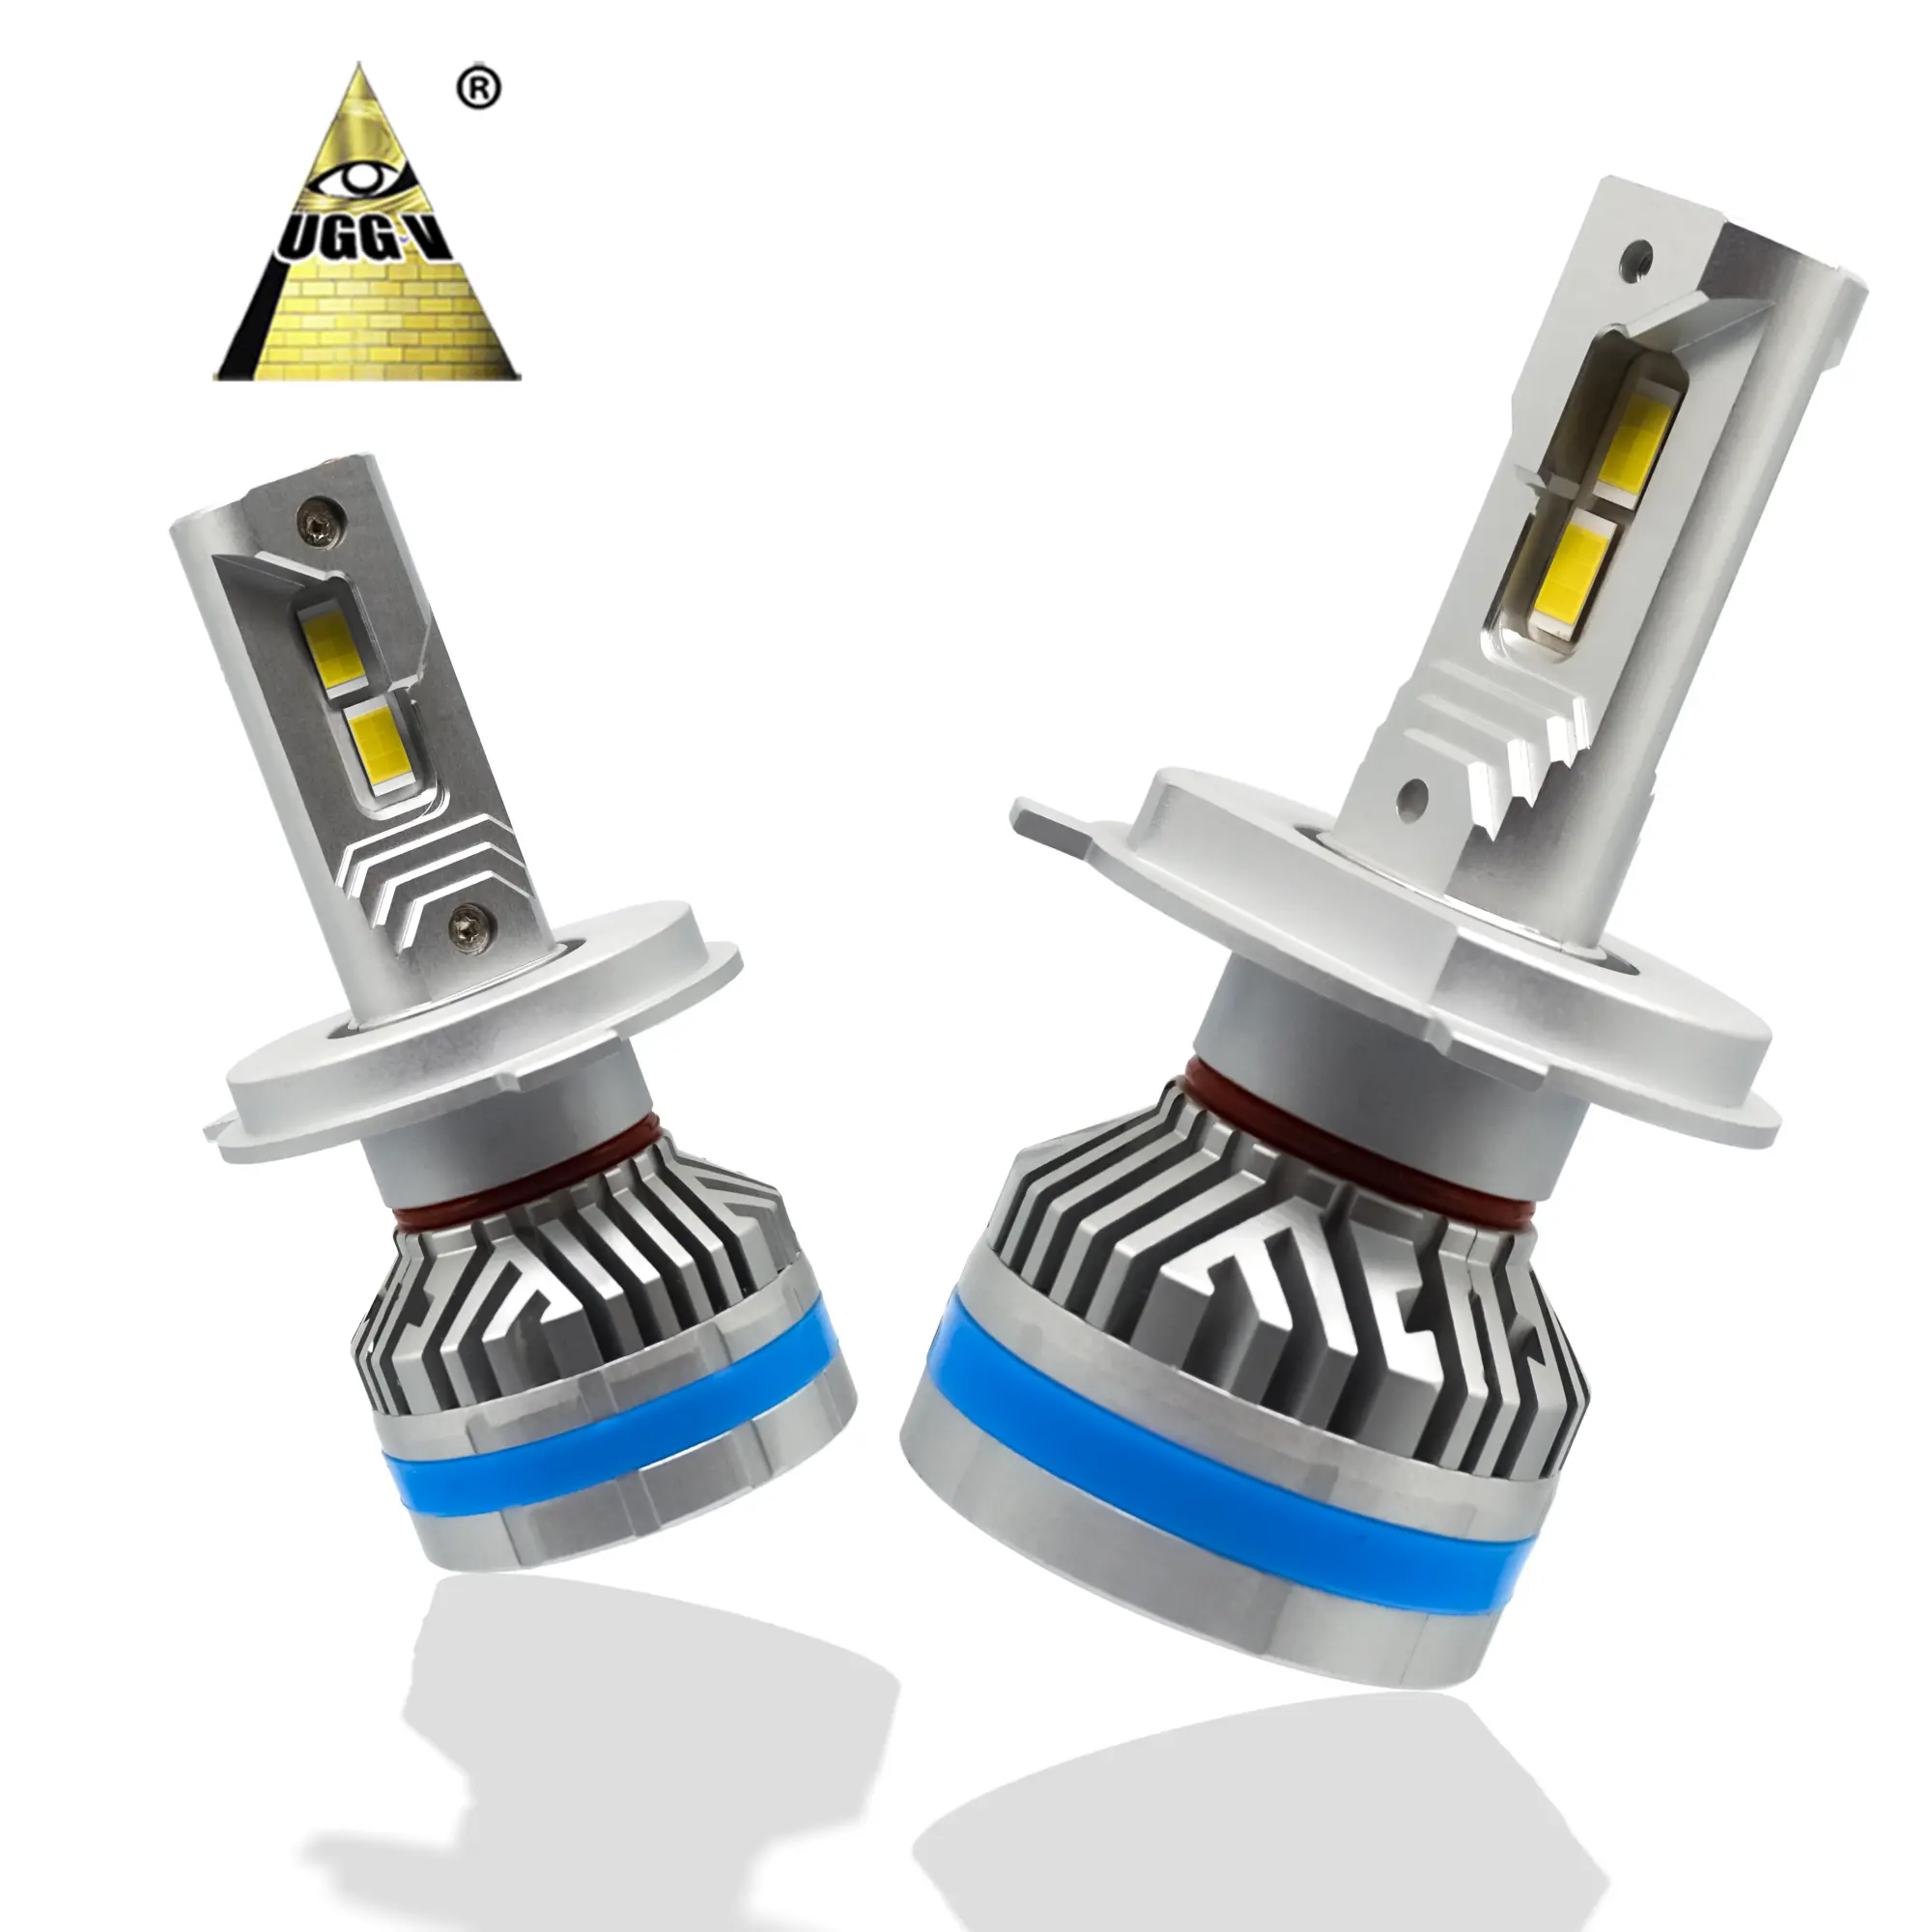 UGT20 ad alta potenza 12V 100W 20000lm bianco impermeabile Foco H4 lampadina per VW H8 H1 H3 H13 Made by Ford